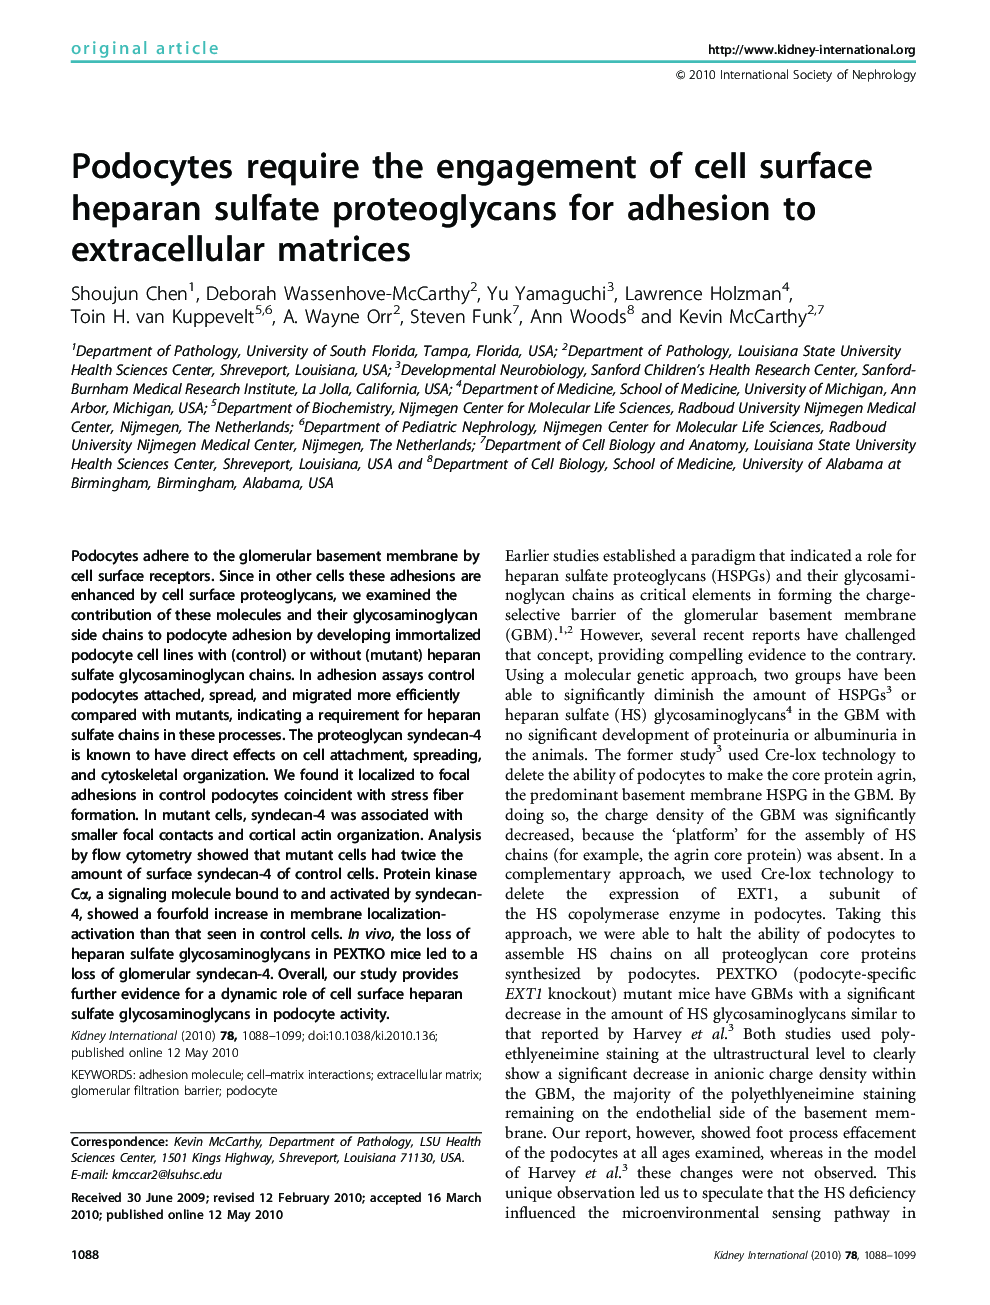 Podocytes require the engagement of cell surface heparan sulfate proteoglycans for adhesion to extracellular matrices 